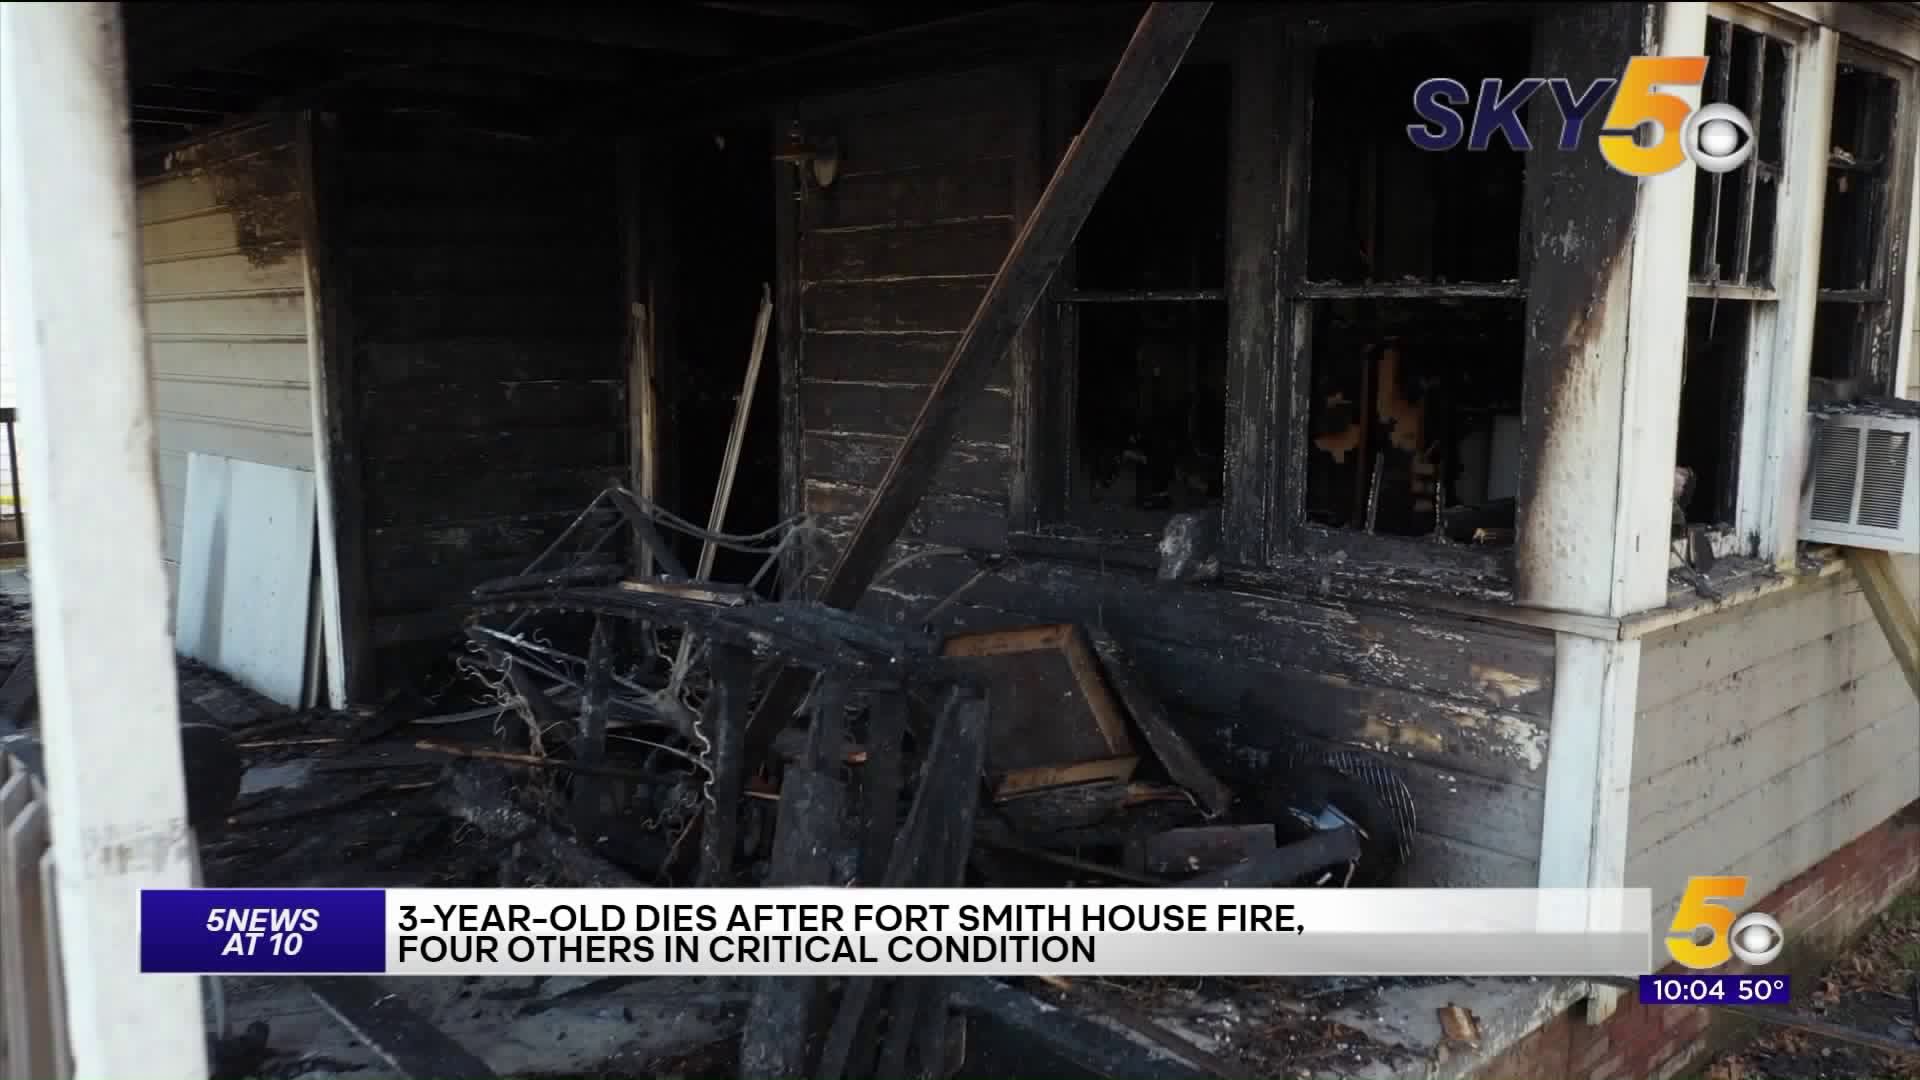 3-Year-Old Dies After Early Morning Fort Smith House Fire, 4 Others Remain In Critical Condition